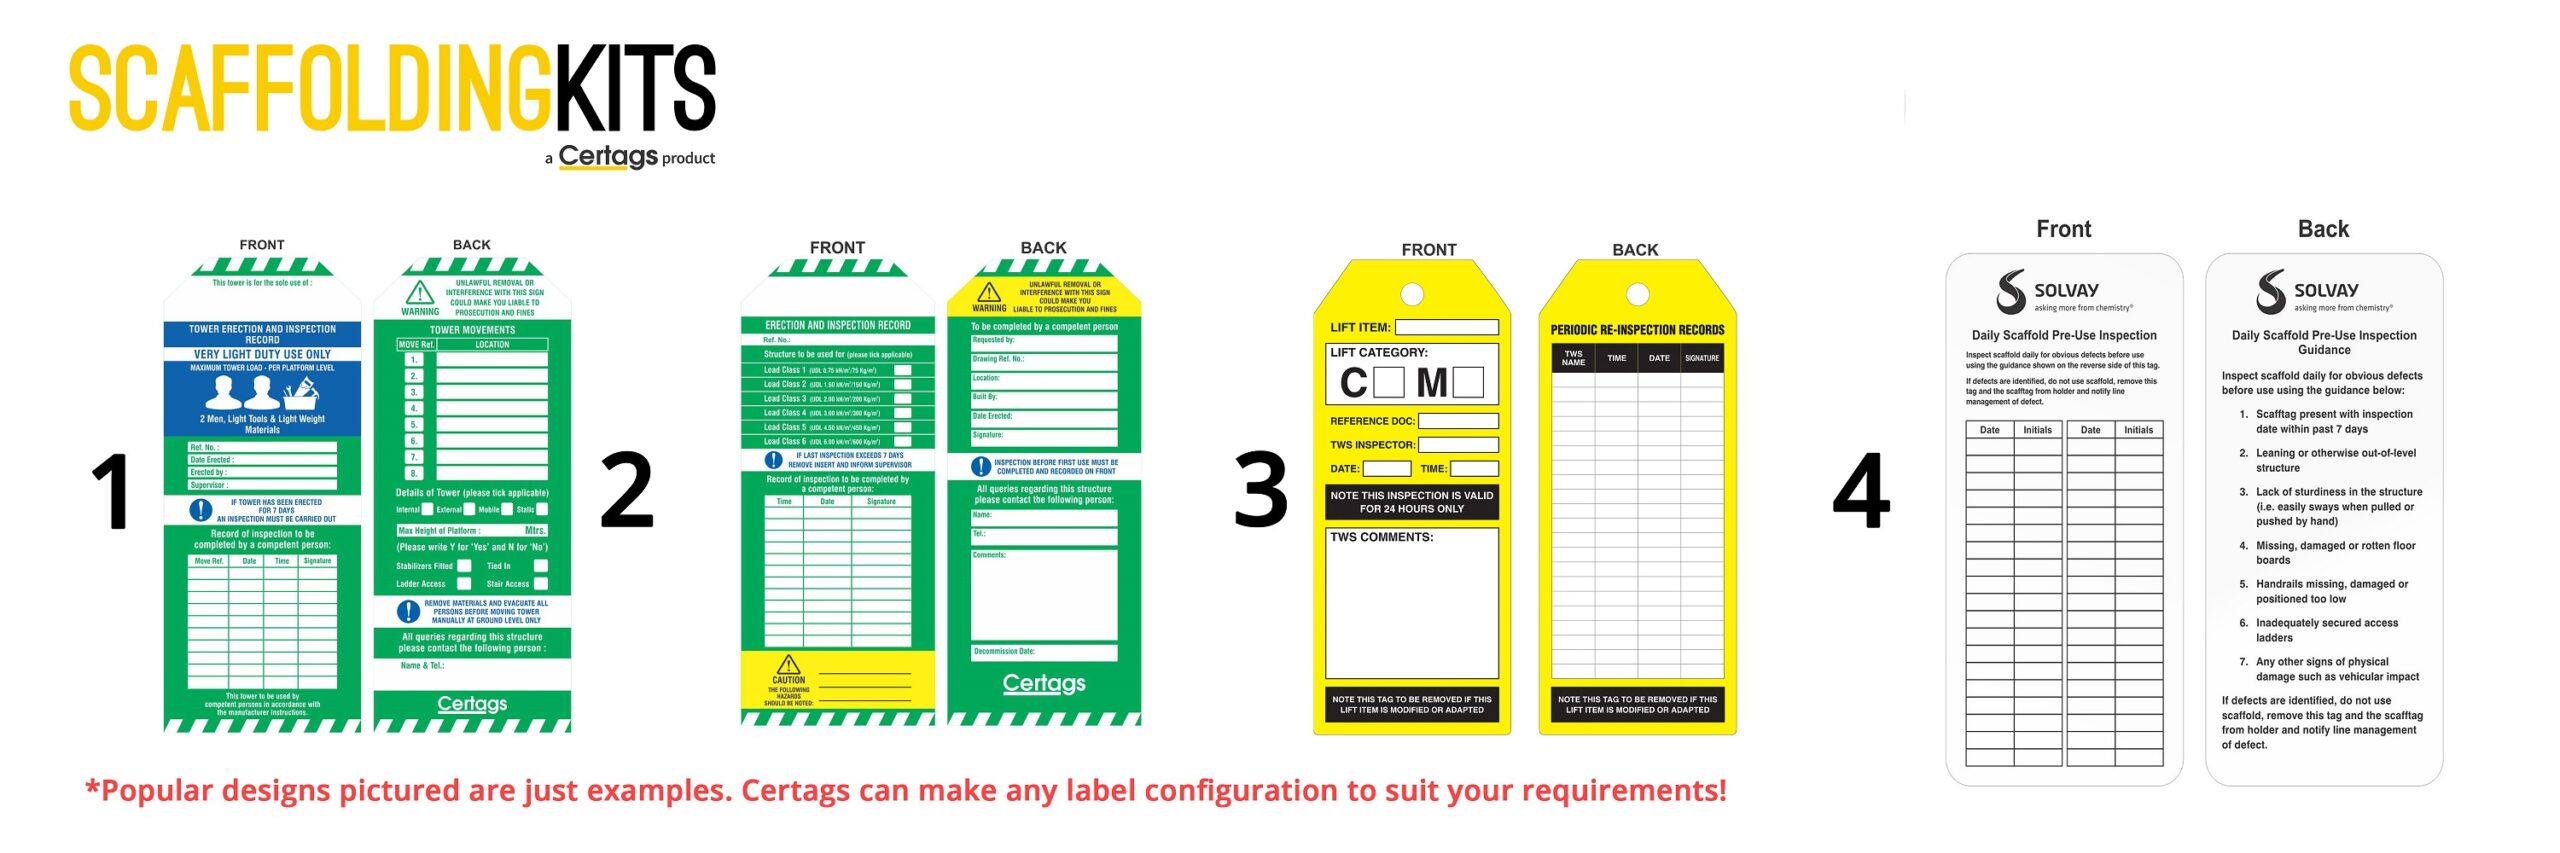 scaffolding tags, scaftags, scaffolding inspection labels